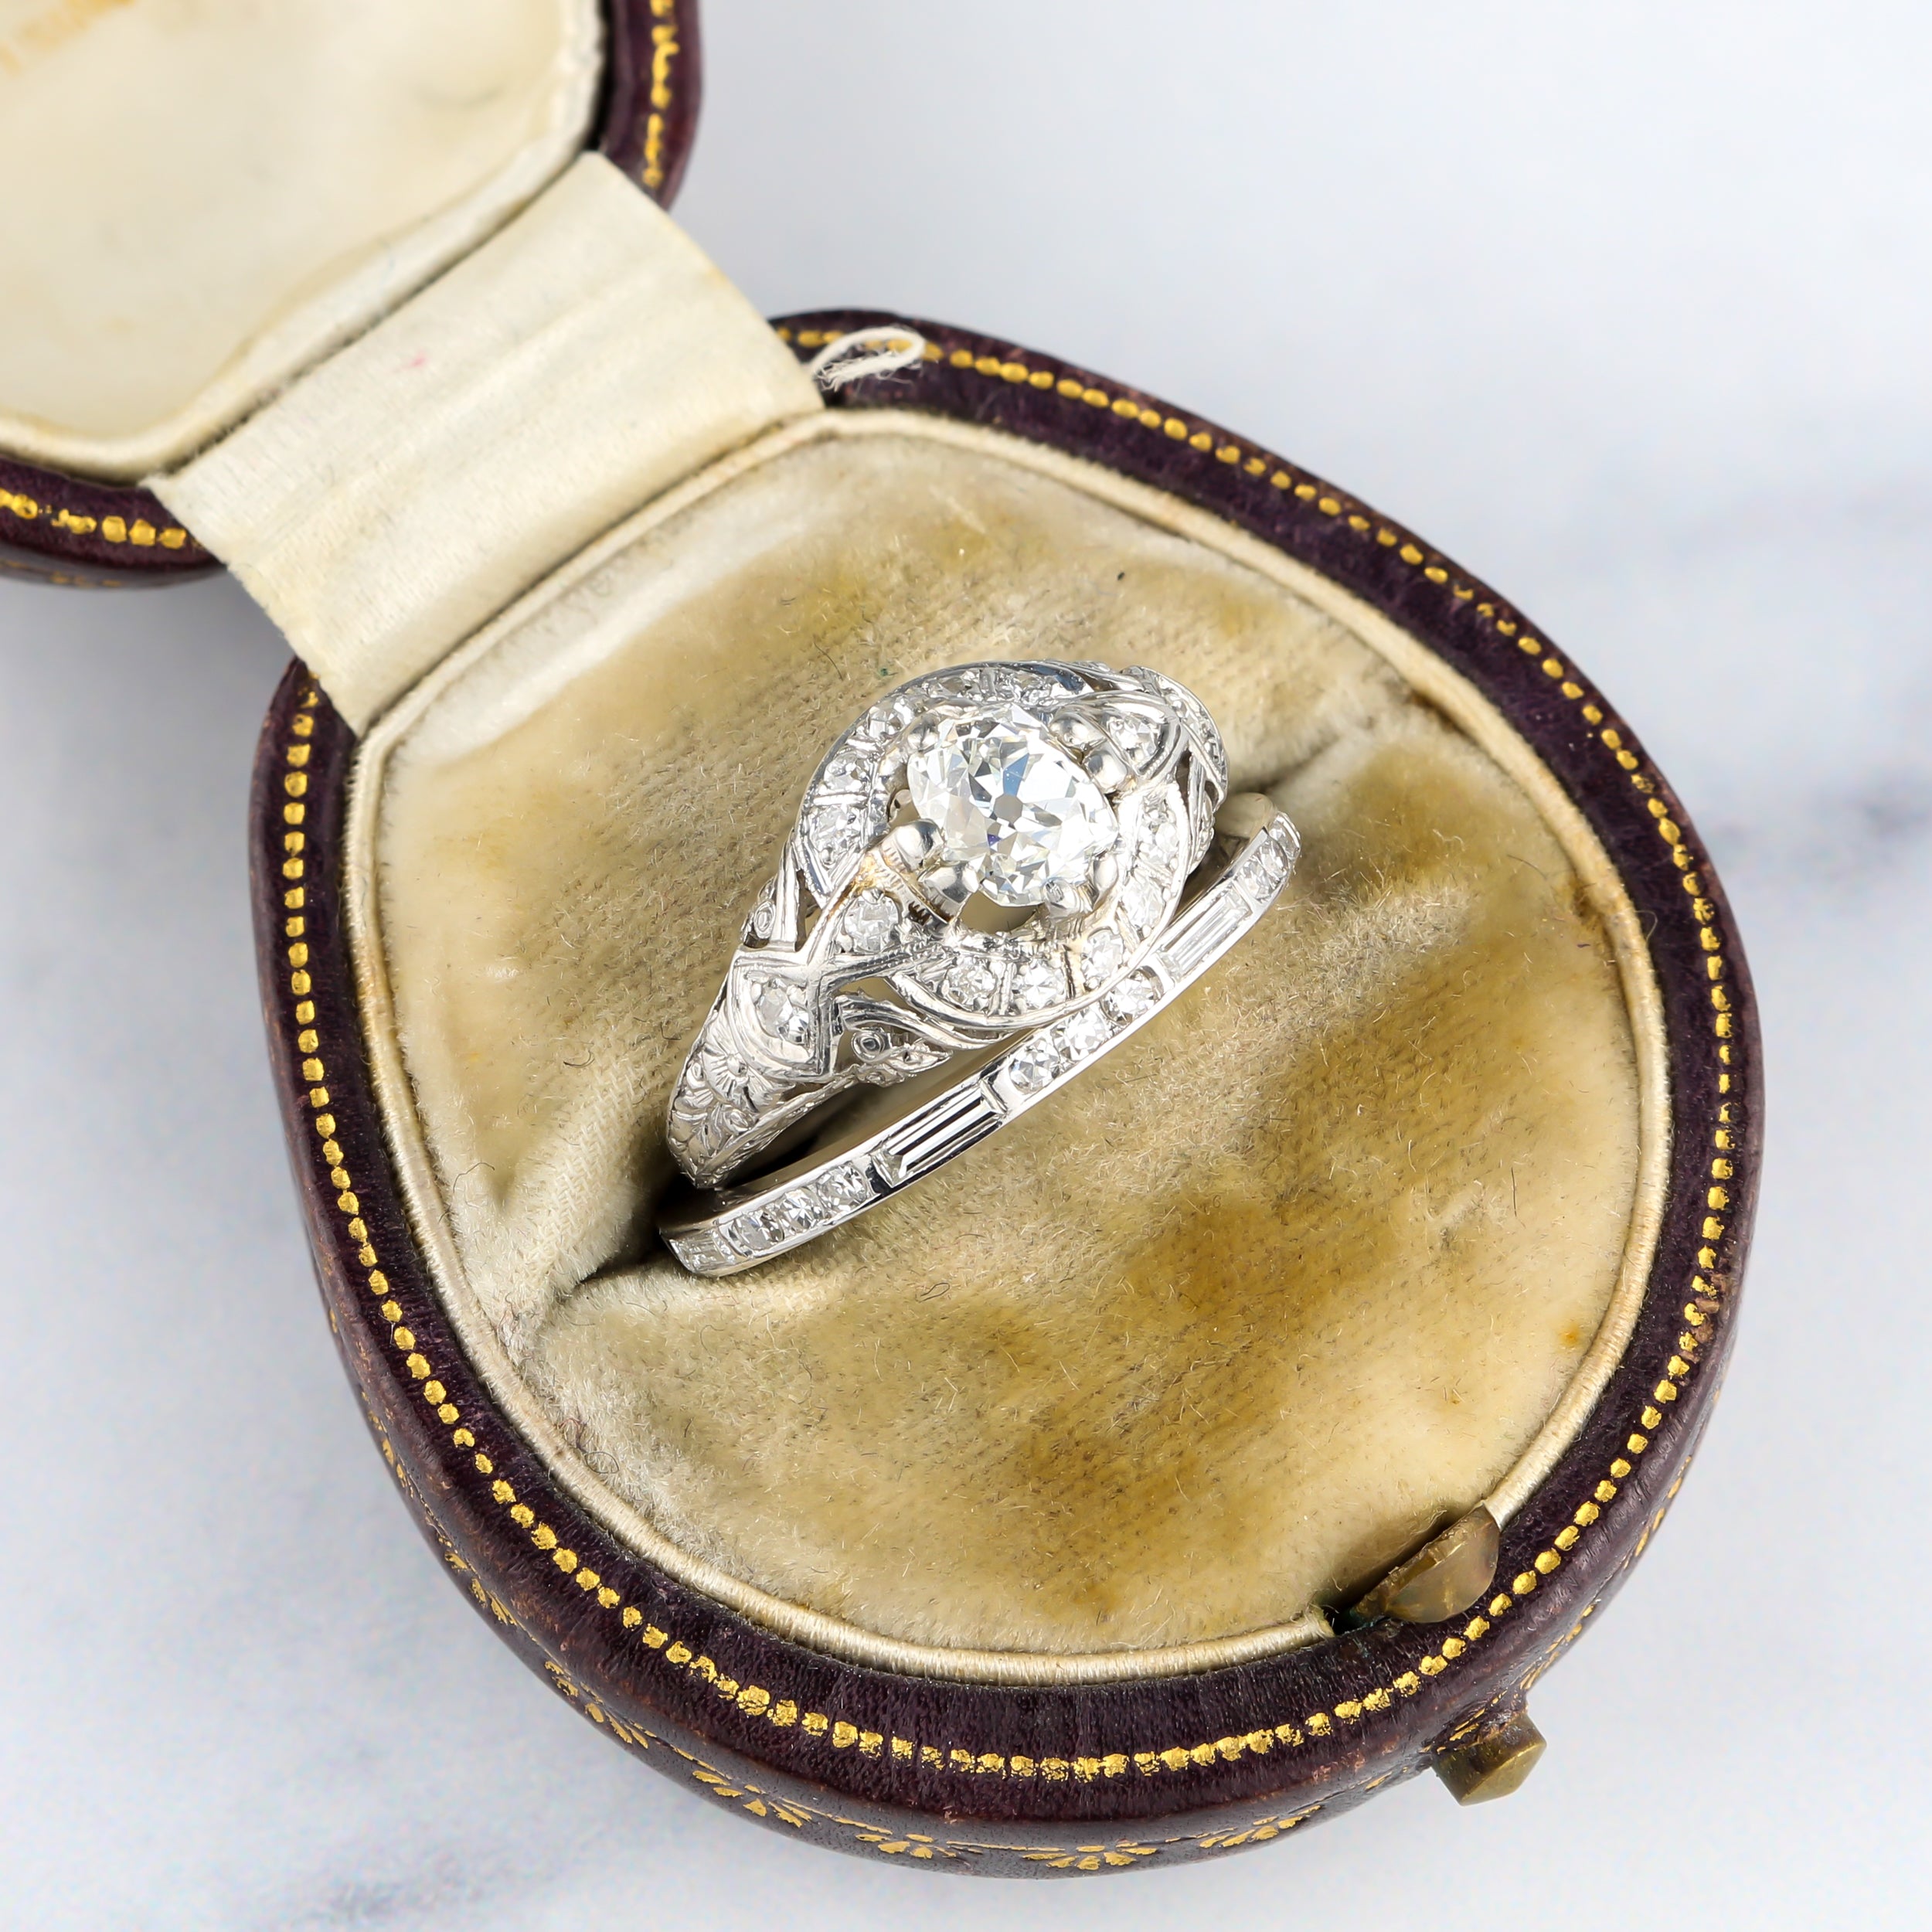 The Appeal of Vintage Engagement Rings